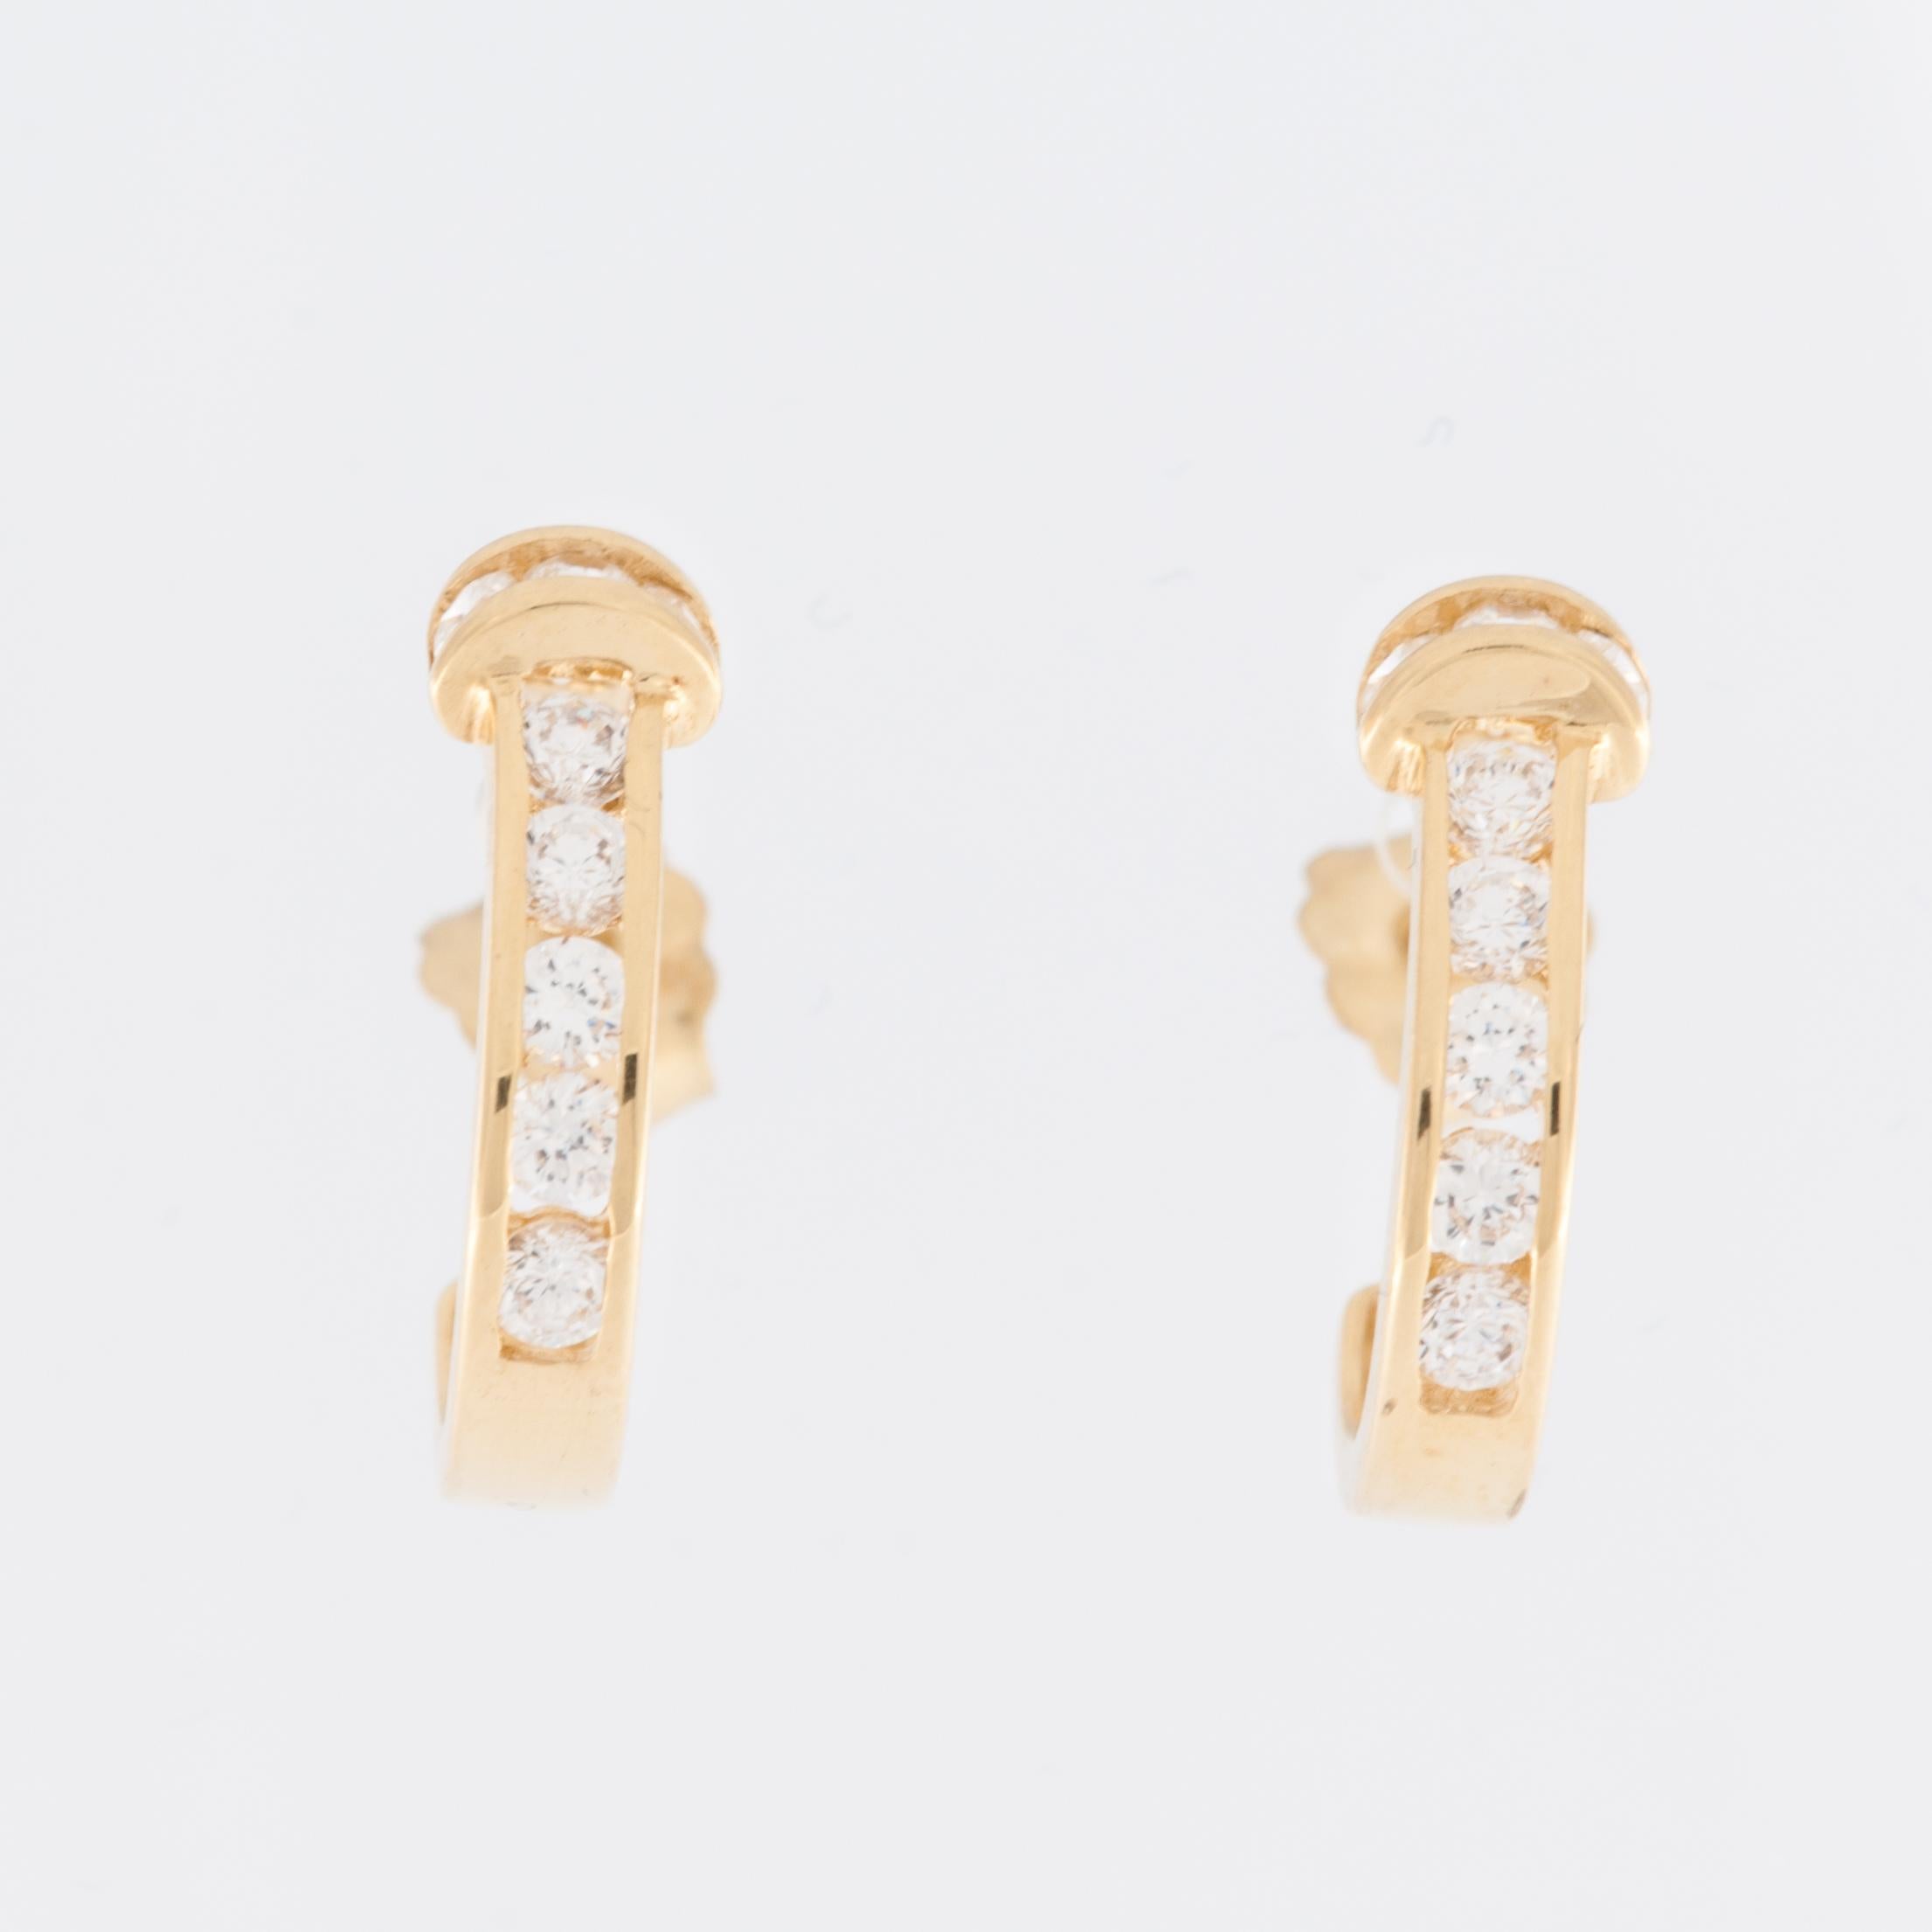 Swiss Vintage 18kt Yellow Gold Earrings with Diamonds In Excellent Condition For Sale In Esch-Sur-Alzette, LU